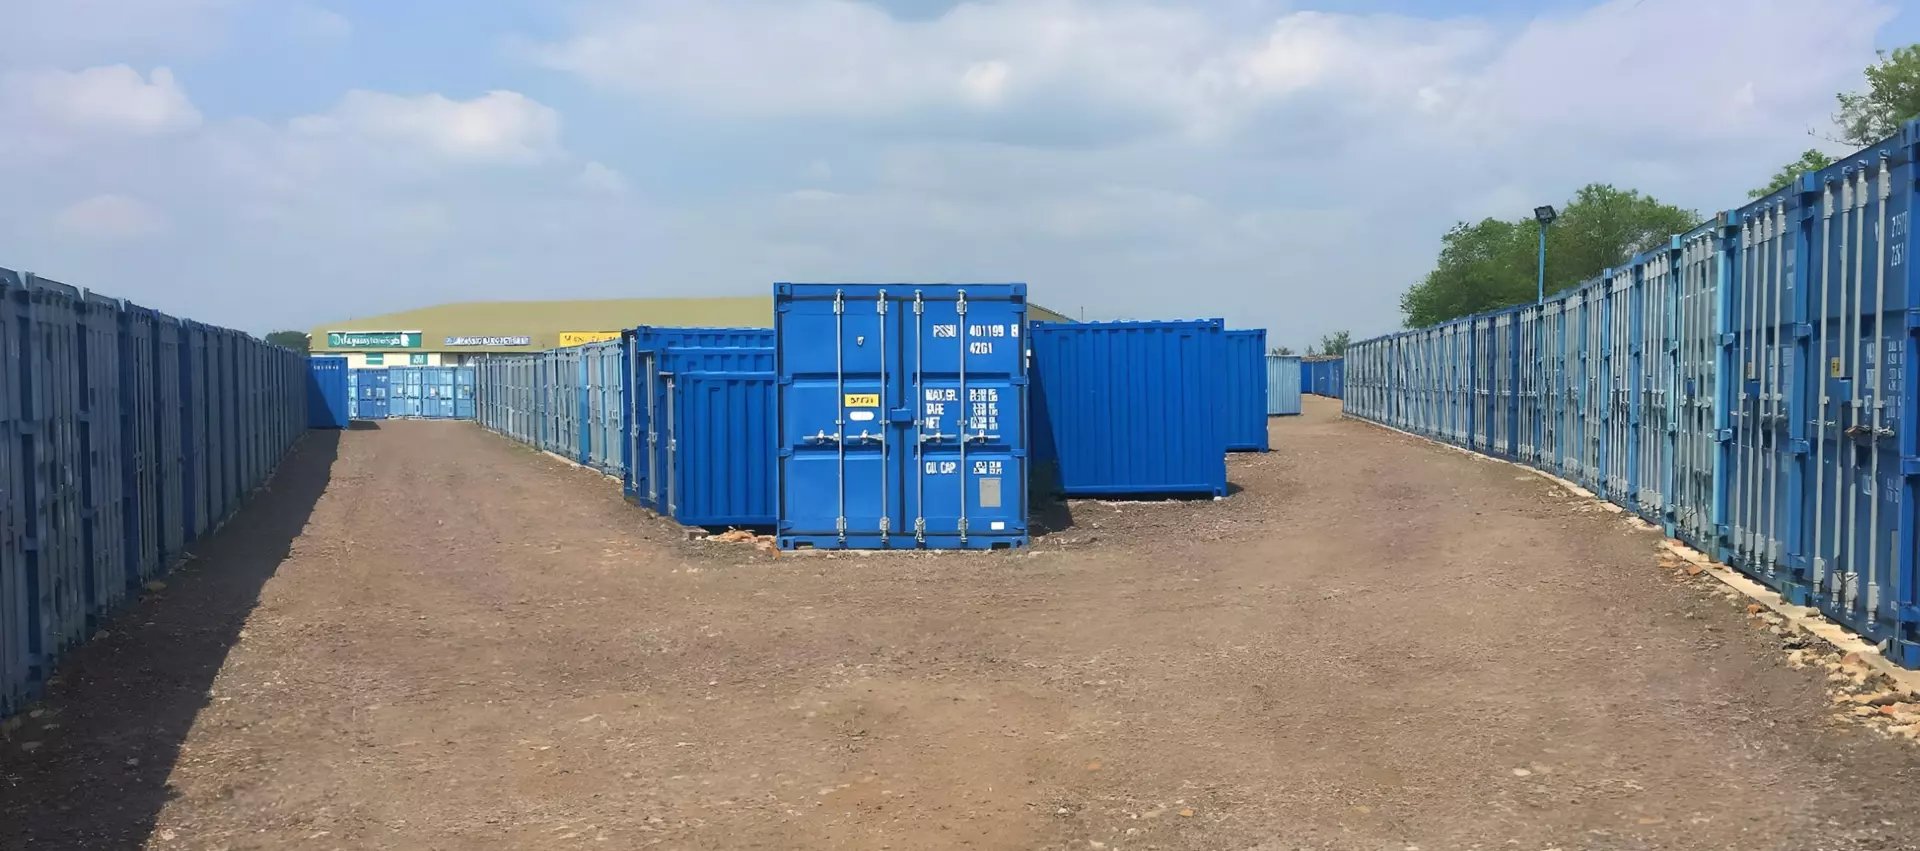 foremost-public-self-storage-container-center